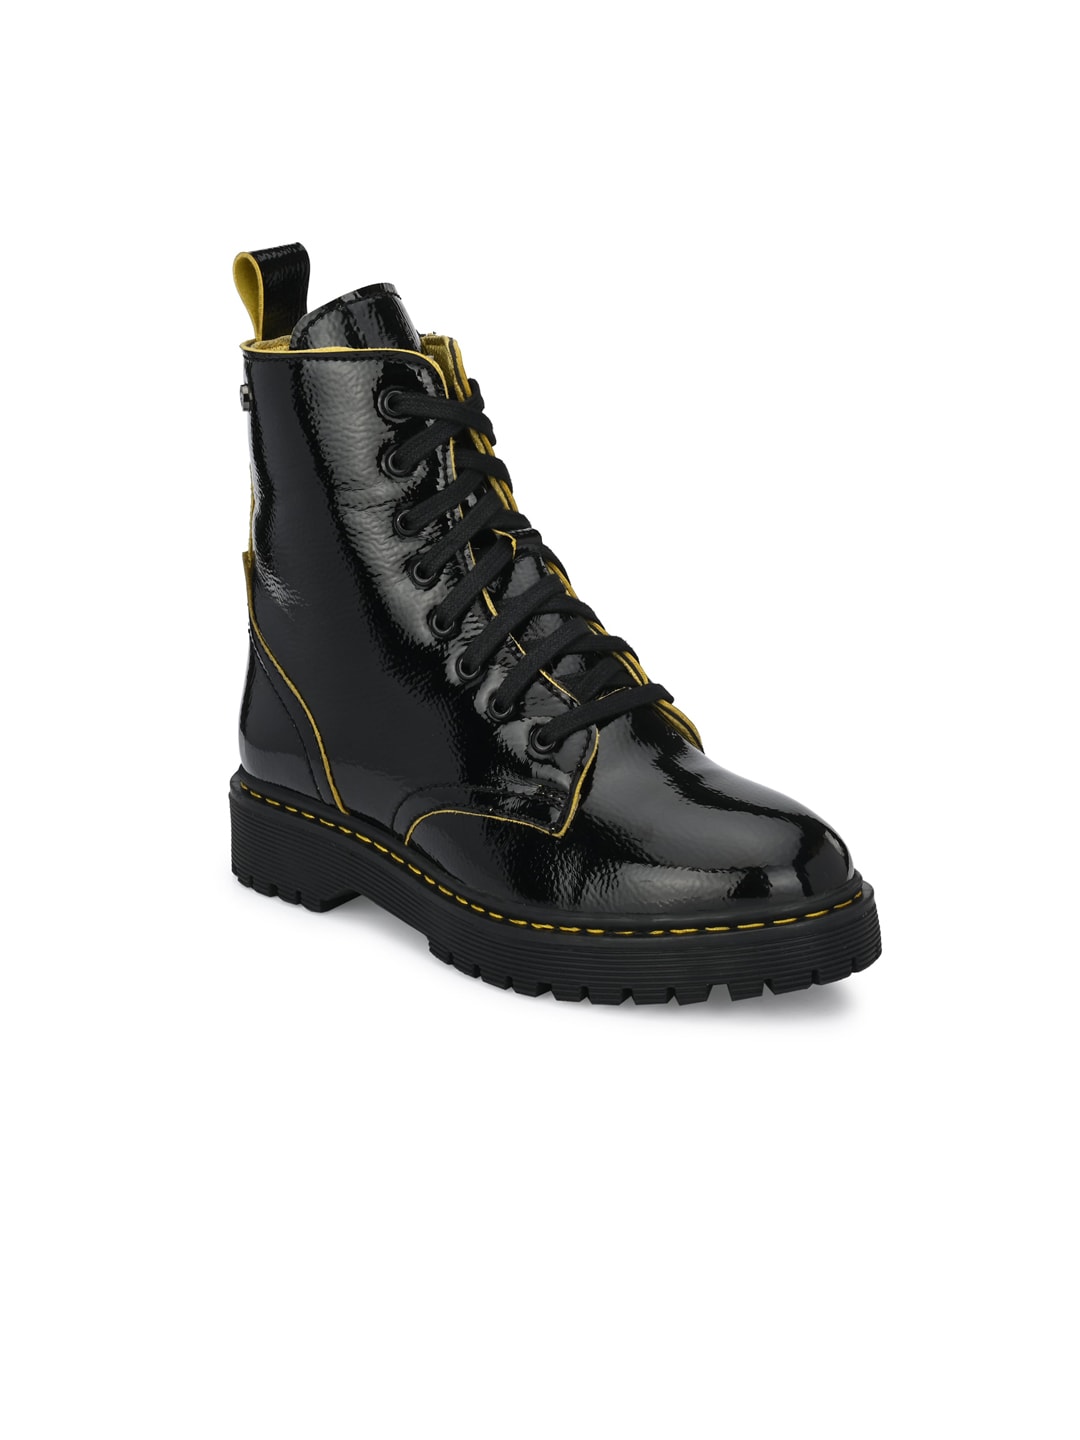 Delize Women Black & Yellow Wedge Heeled Boots Price in India